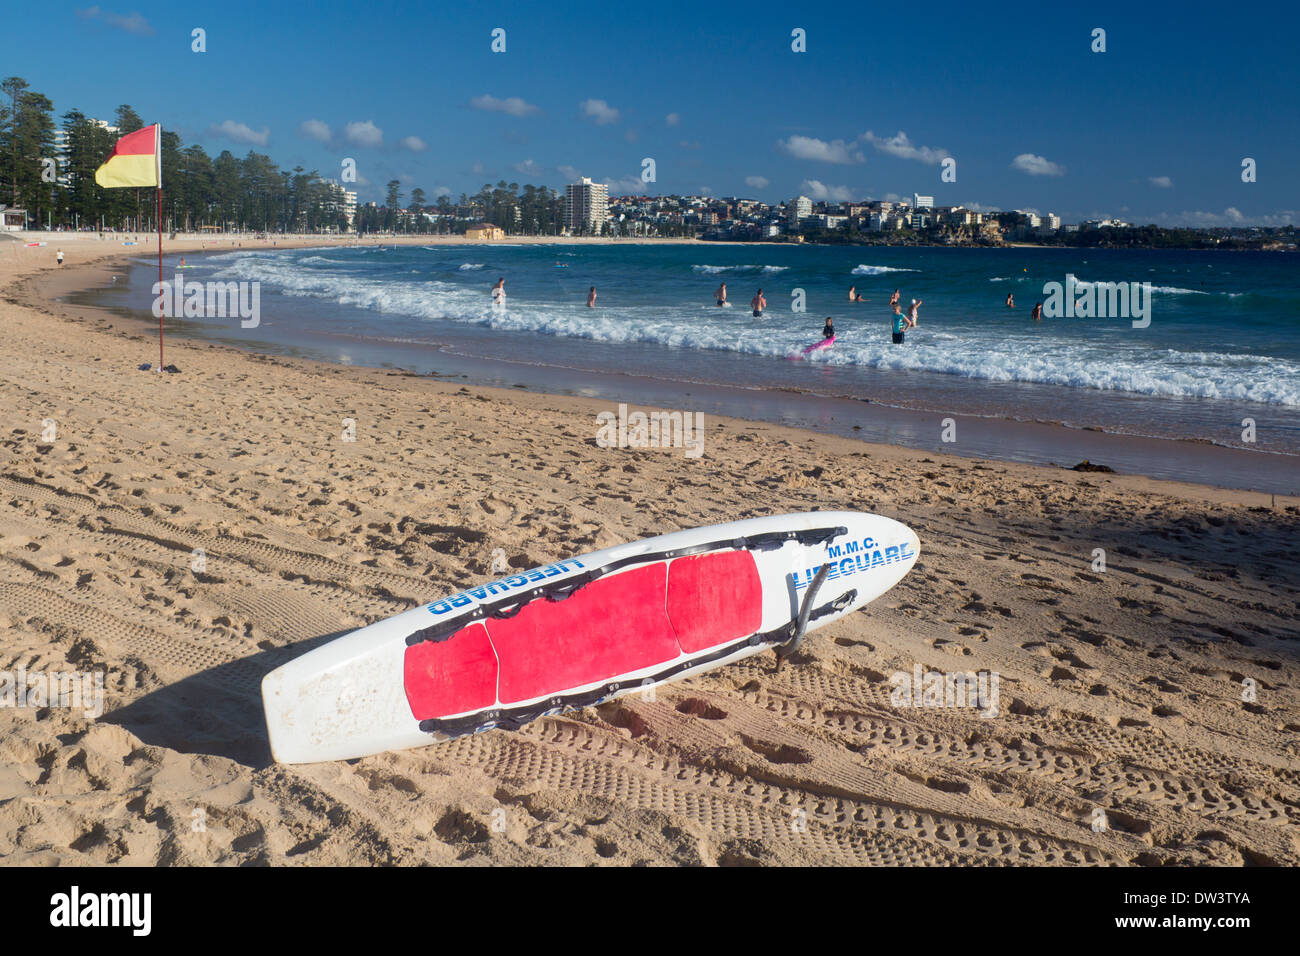 Manly North Steyne Beach with lifeguard surfboard in foreground Northern Beaches Sydney New South Wales NSW Australia Stock Photo